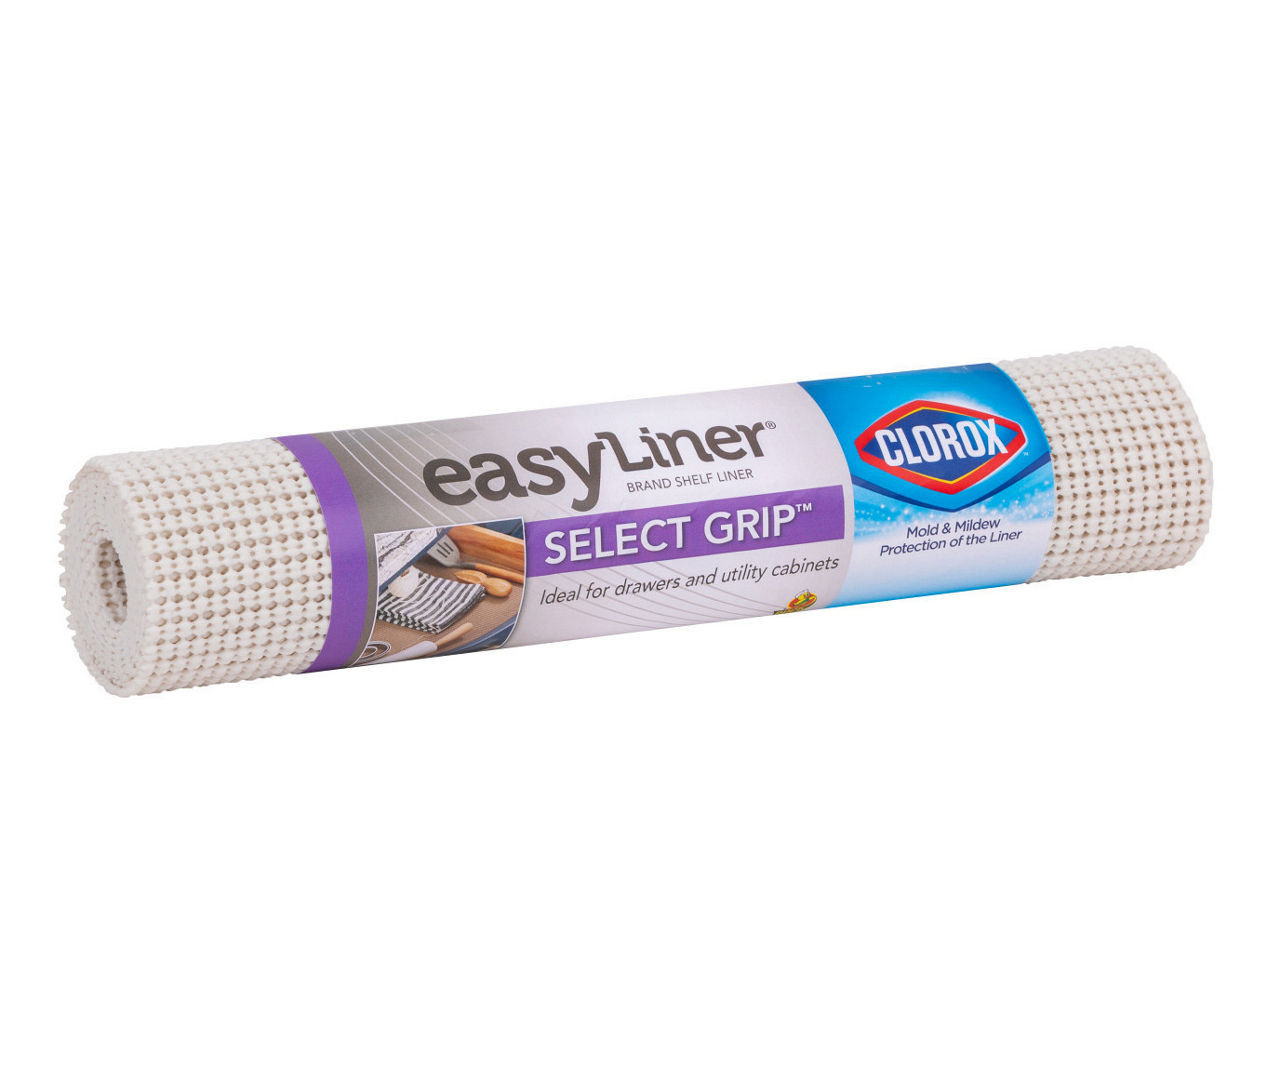 Select Grip Easy Liner Brand Shelf Liner with Clorox - White, 12 in. x 4 ft.